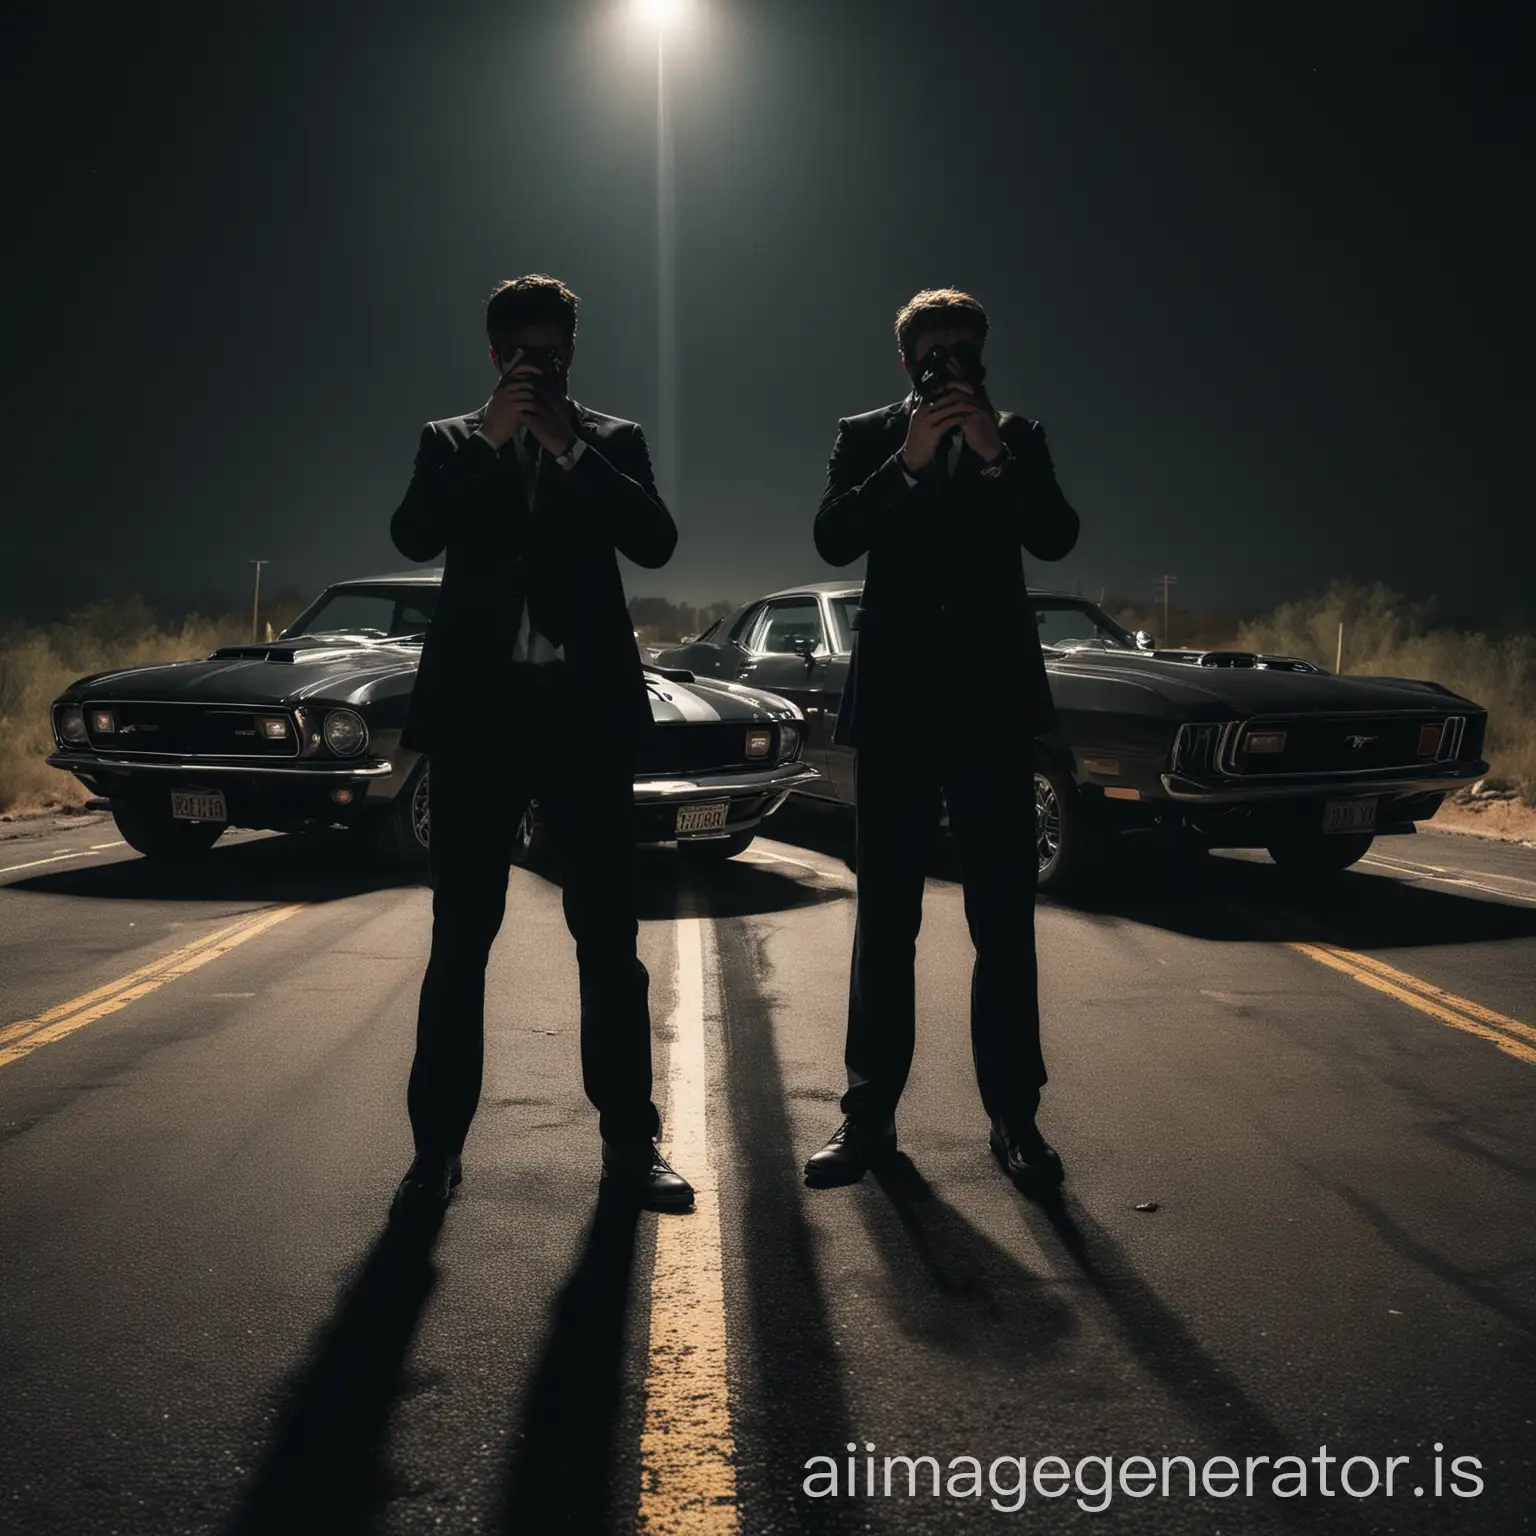 a man wearing black suit hiding his face holding pistol standing inbetween 2 ford mustangs on a road in a dark night 